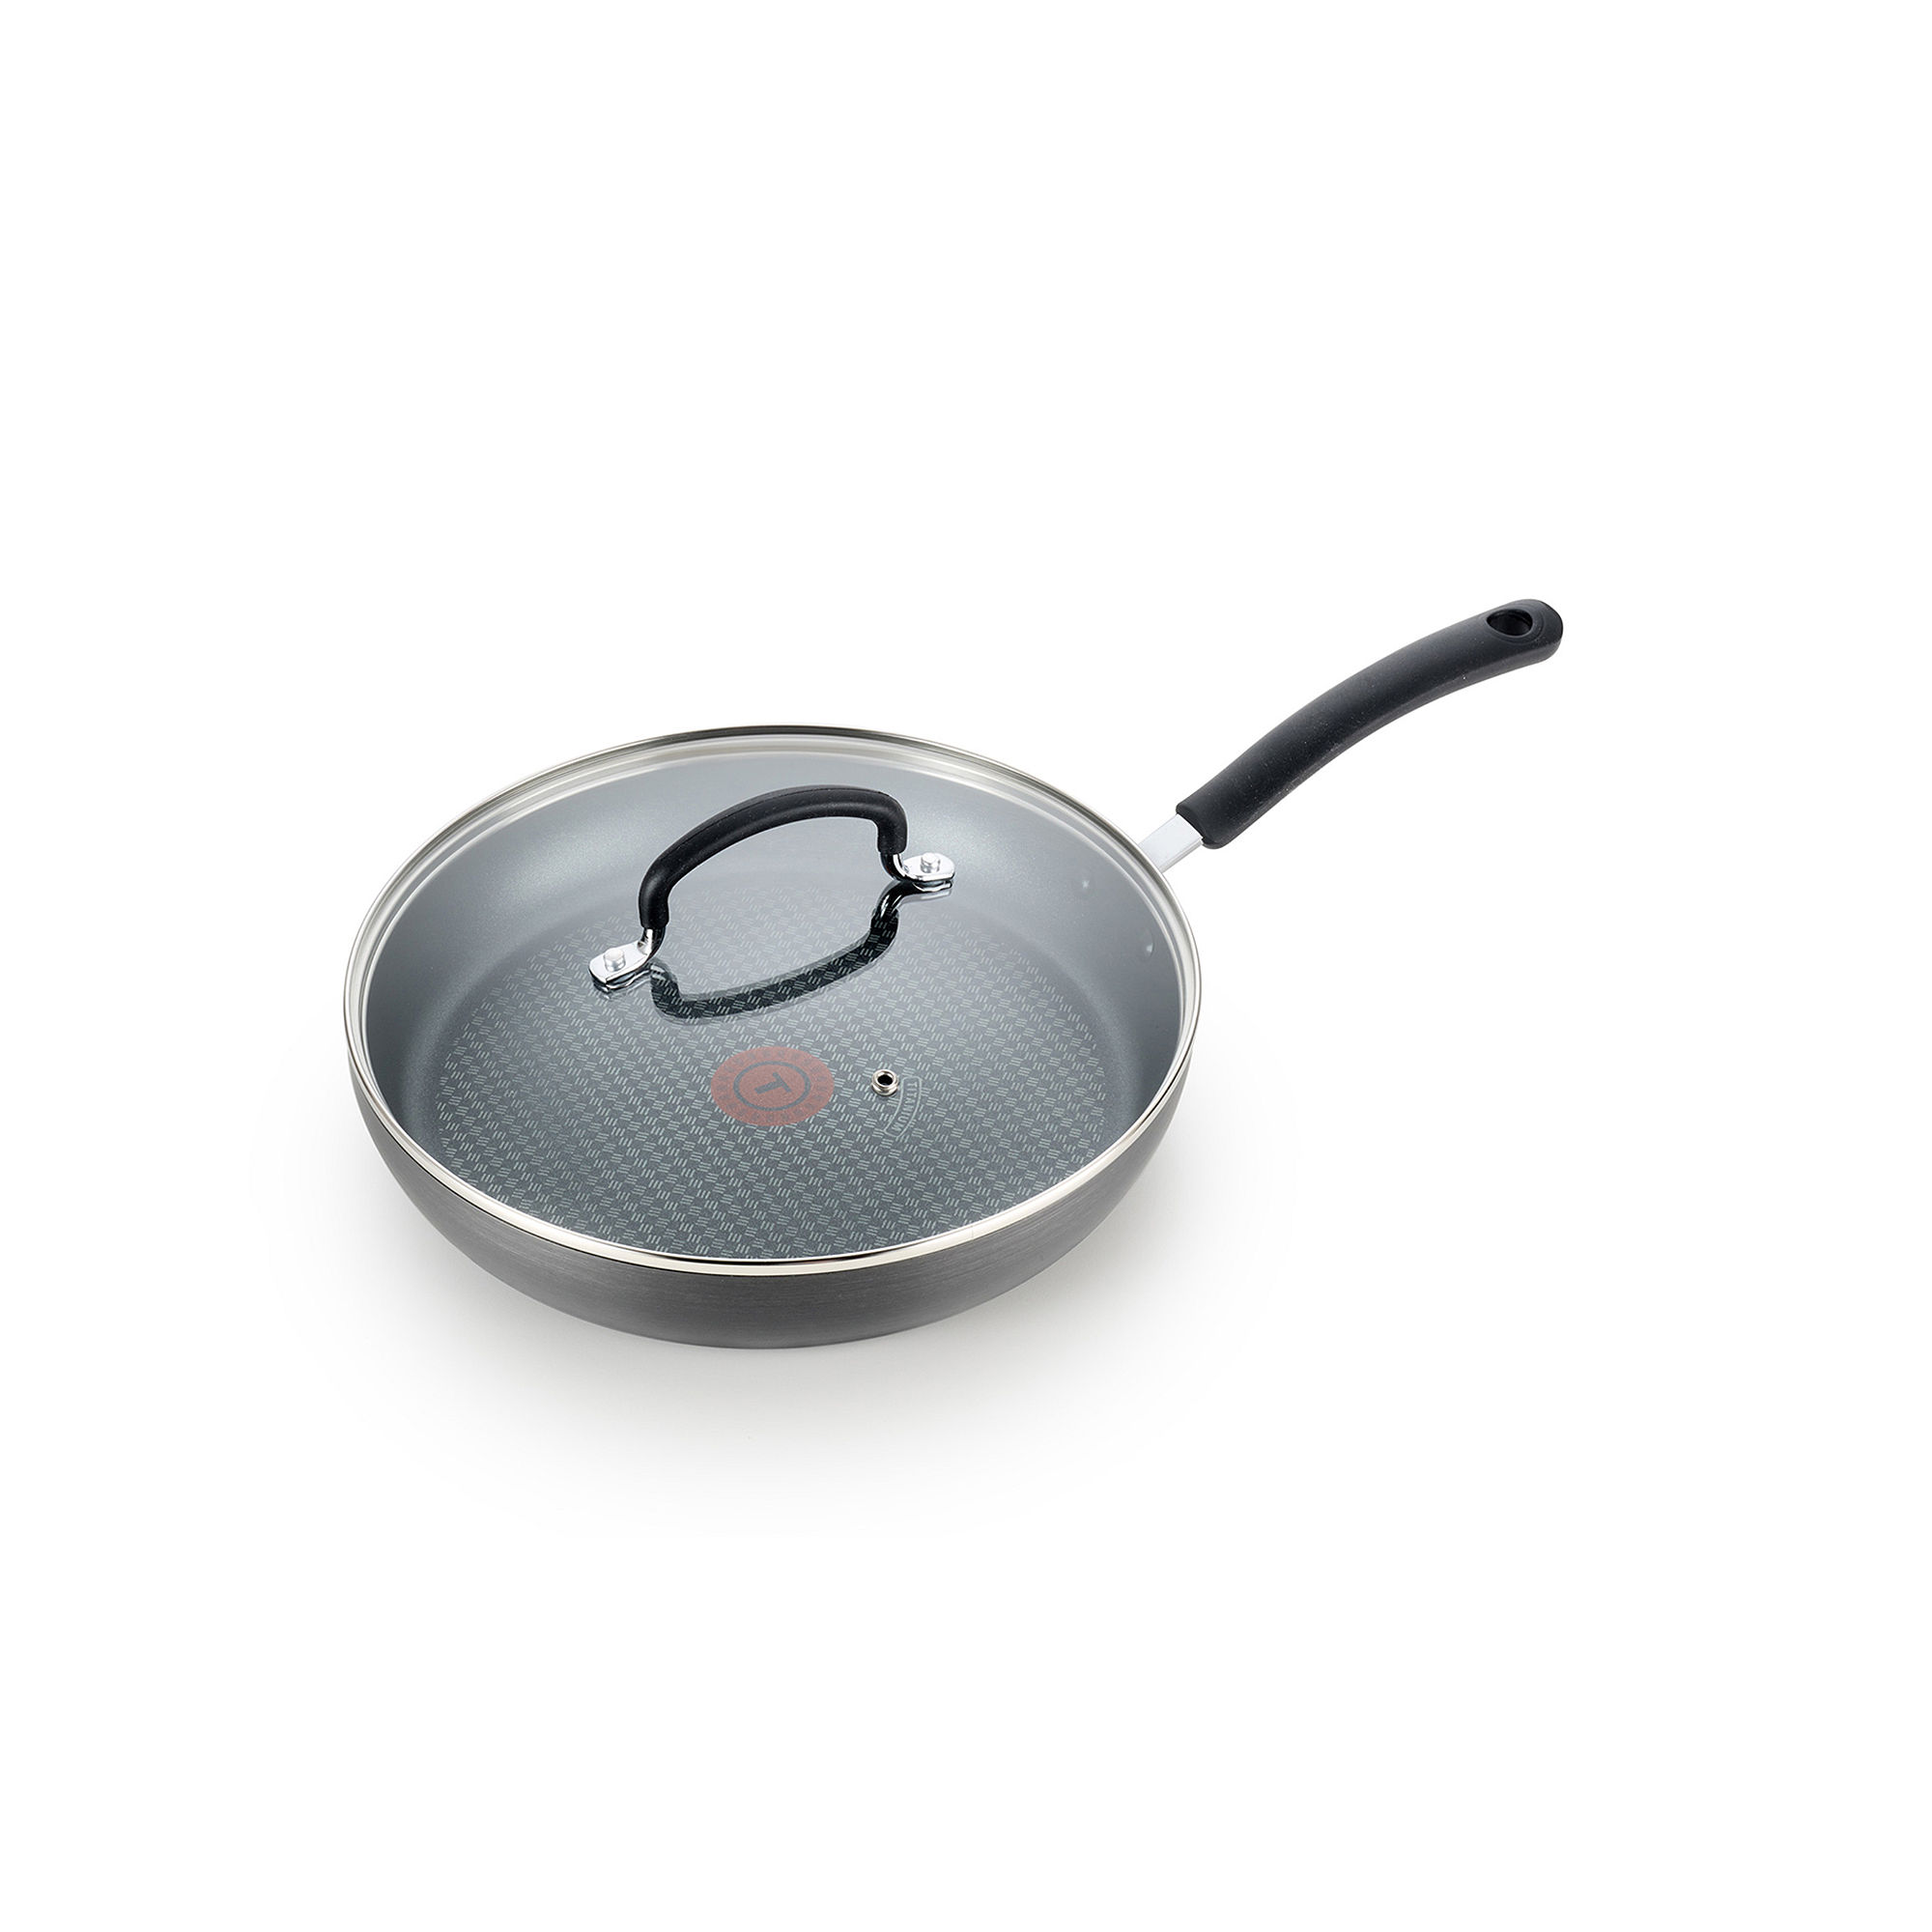 T-fal Ultimate Hard Anodized Non-Stick Cookware, 10 inch Deep Fry Pan, Black - image 4 of 6